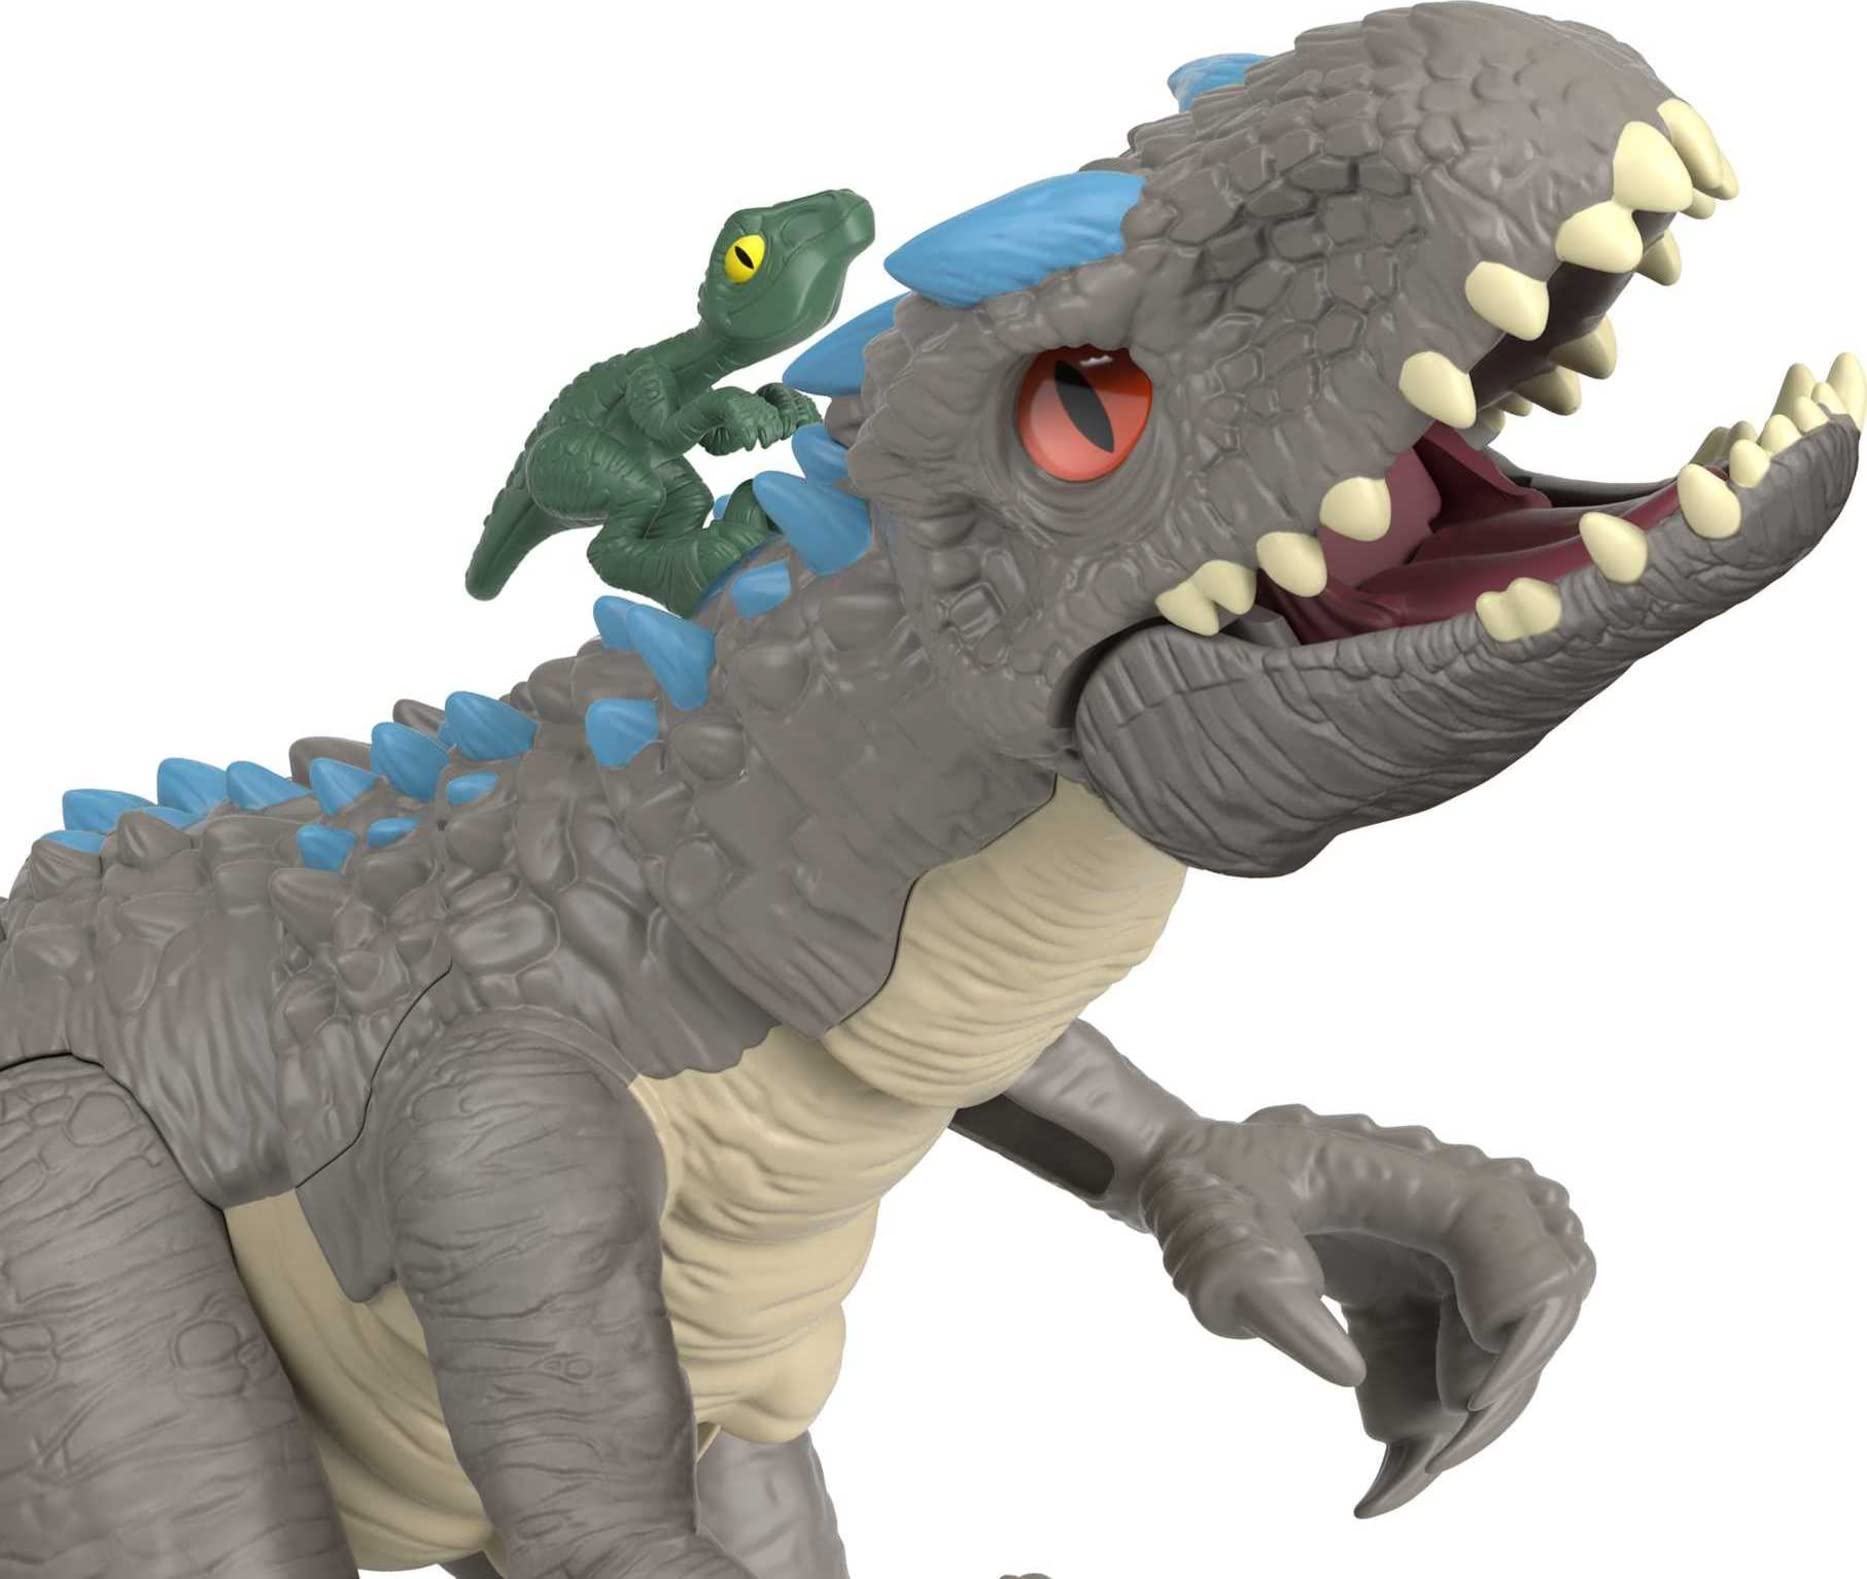 Jurassic World Toys Jurassic World Indominus Rex Dinosaur Toy with Thrashing Action & Raptor Figure for Pretend Play Ages 3+ Years